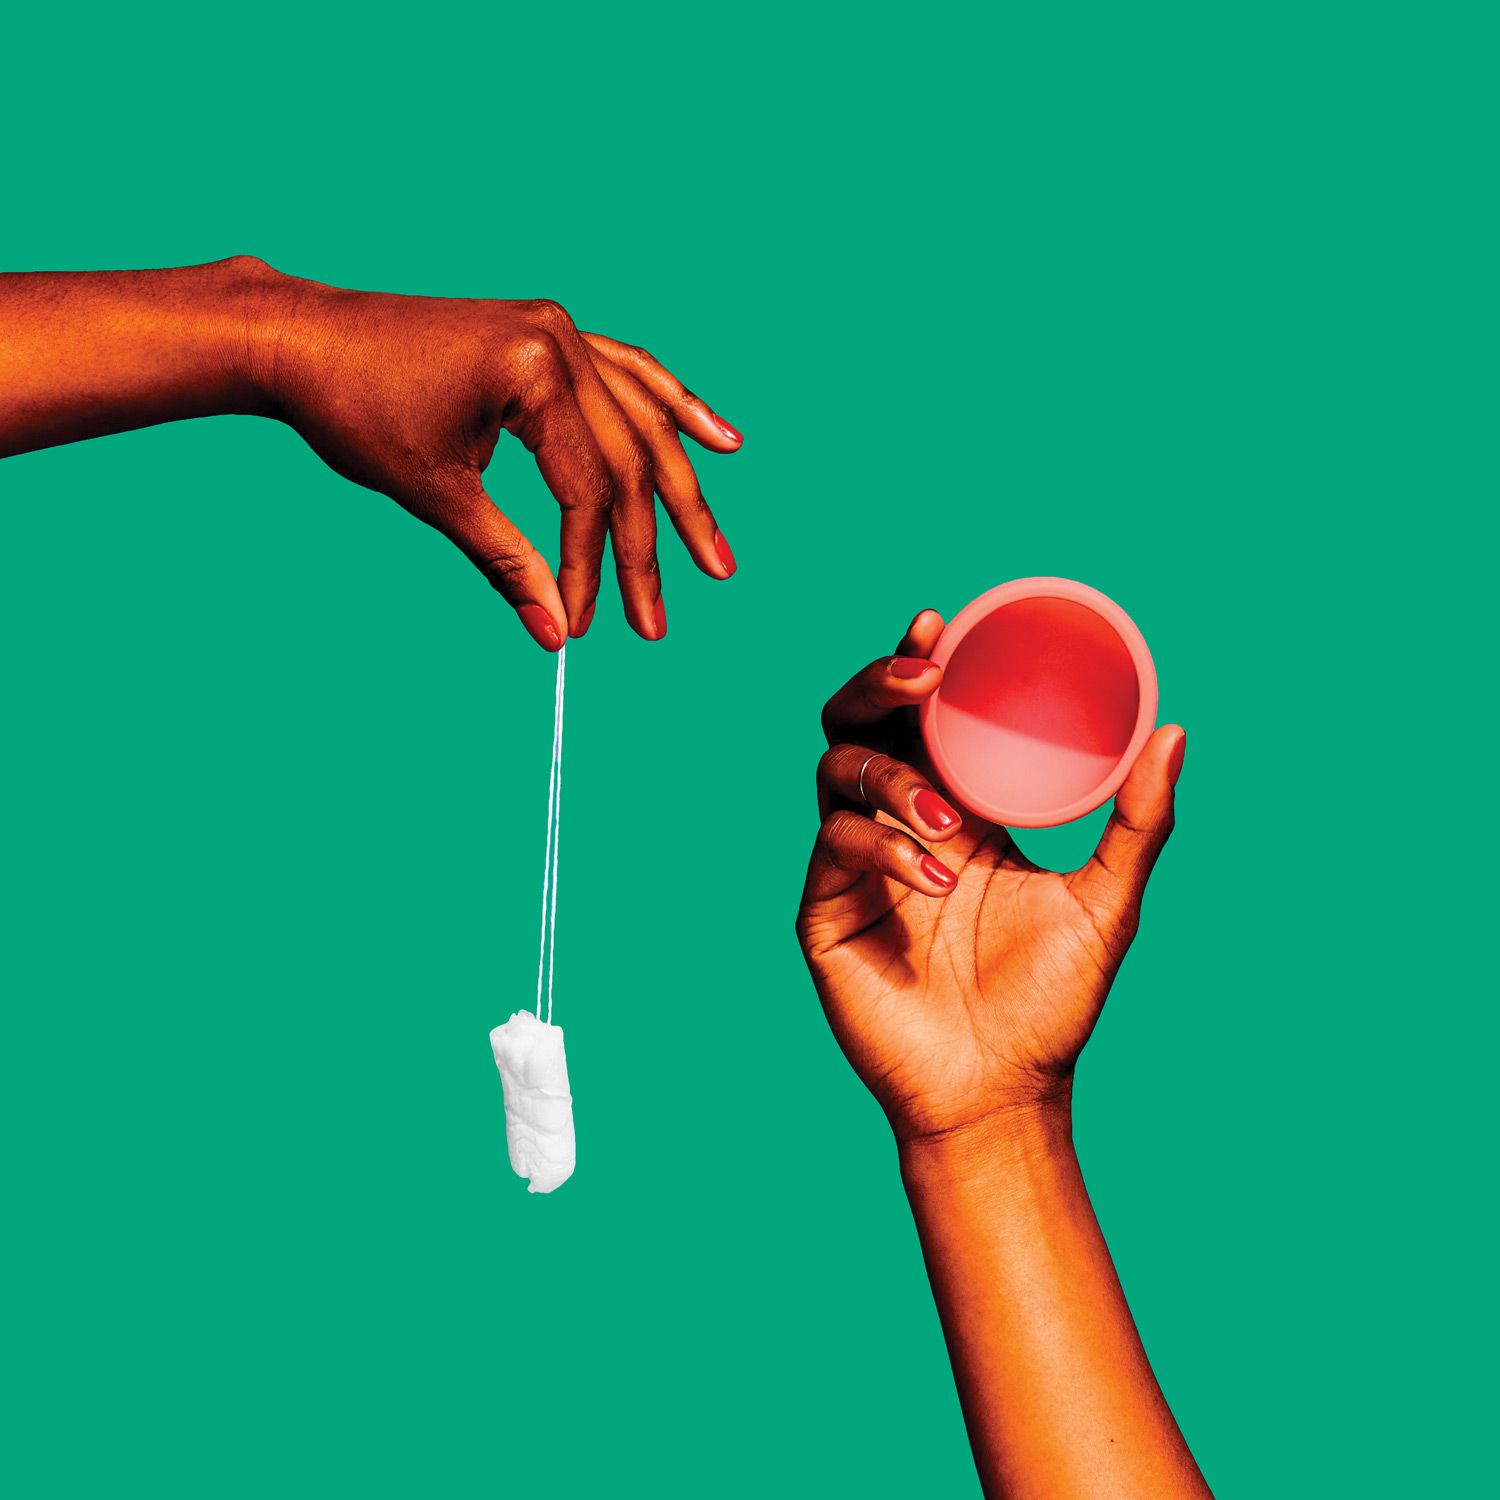 Nixit's unique BPA-free silicone disc has changed the market around menstrual health products